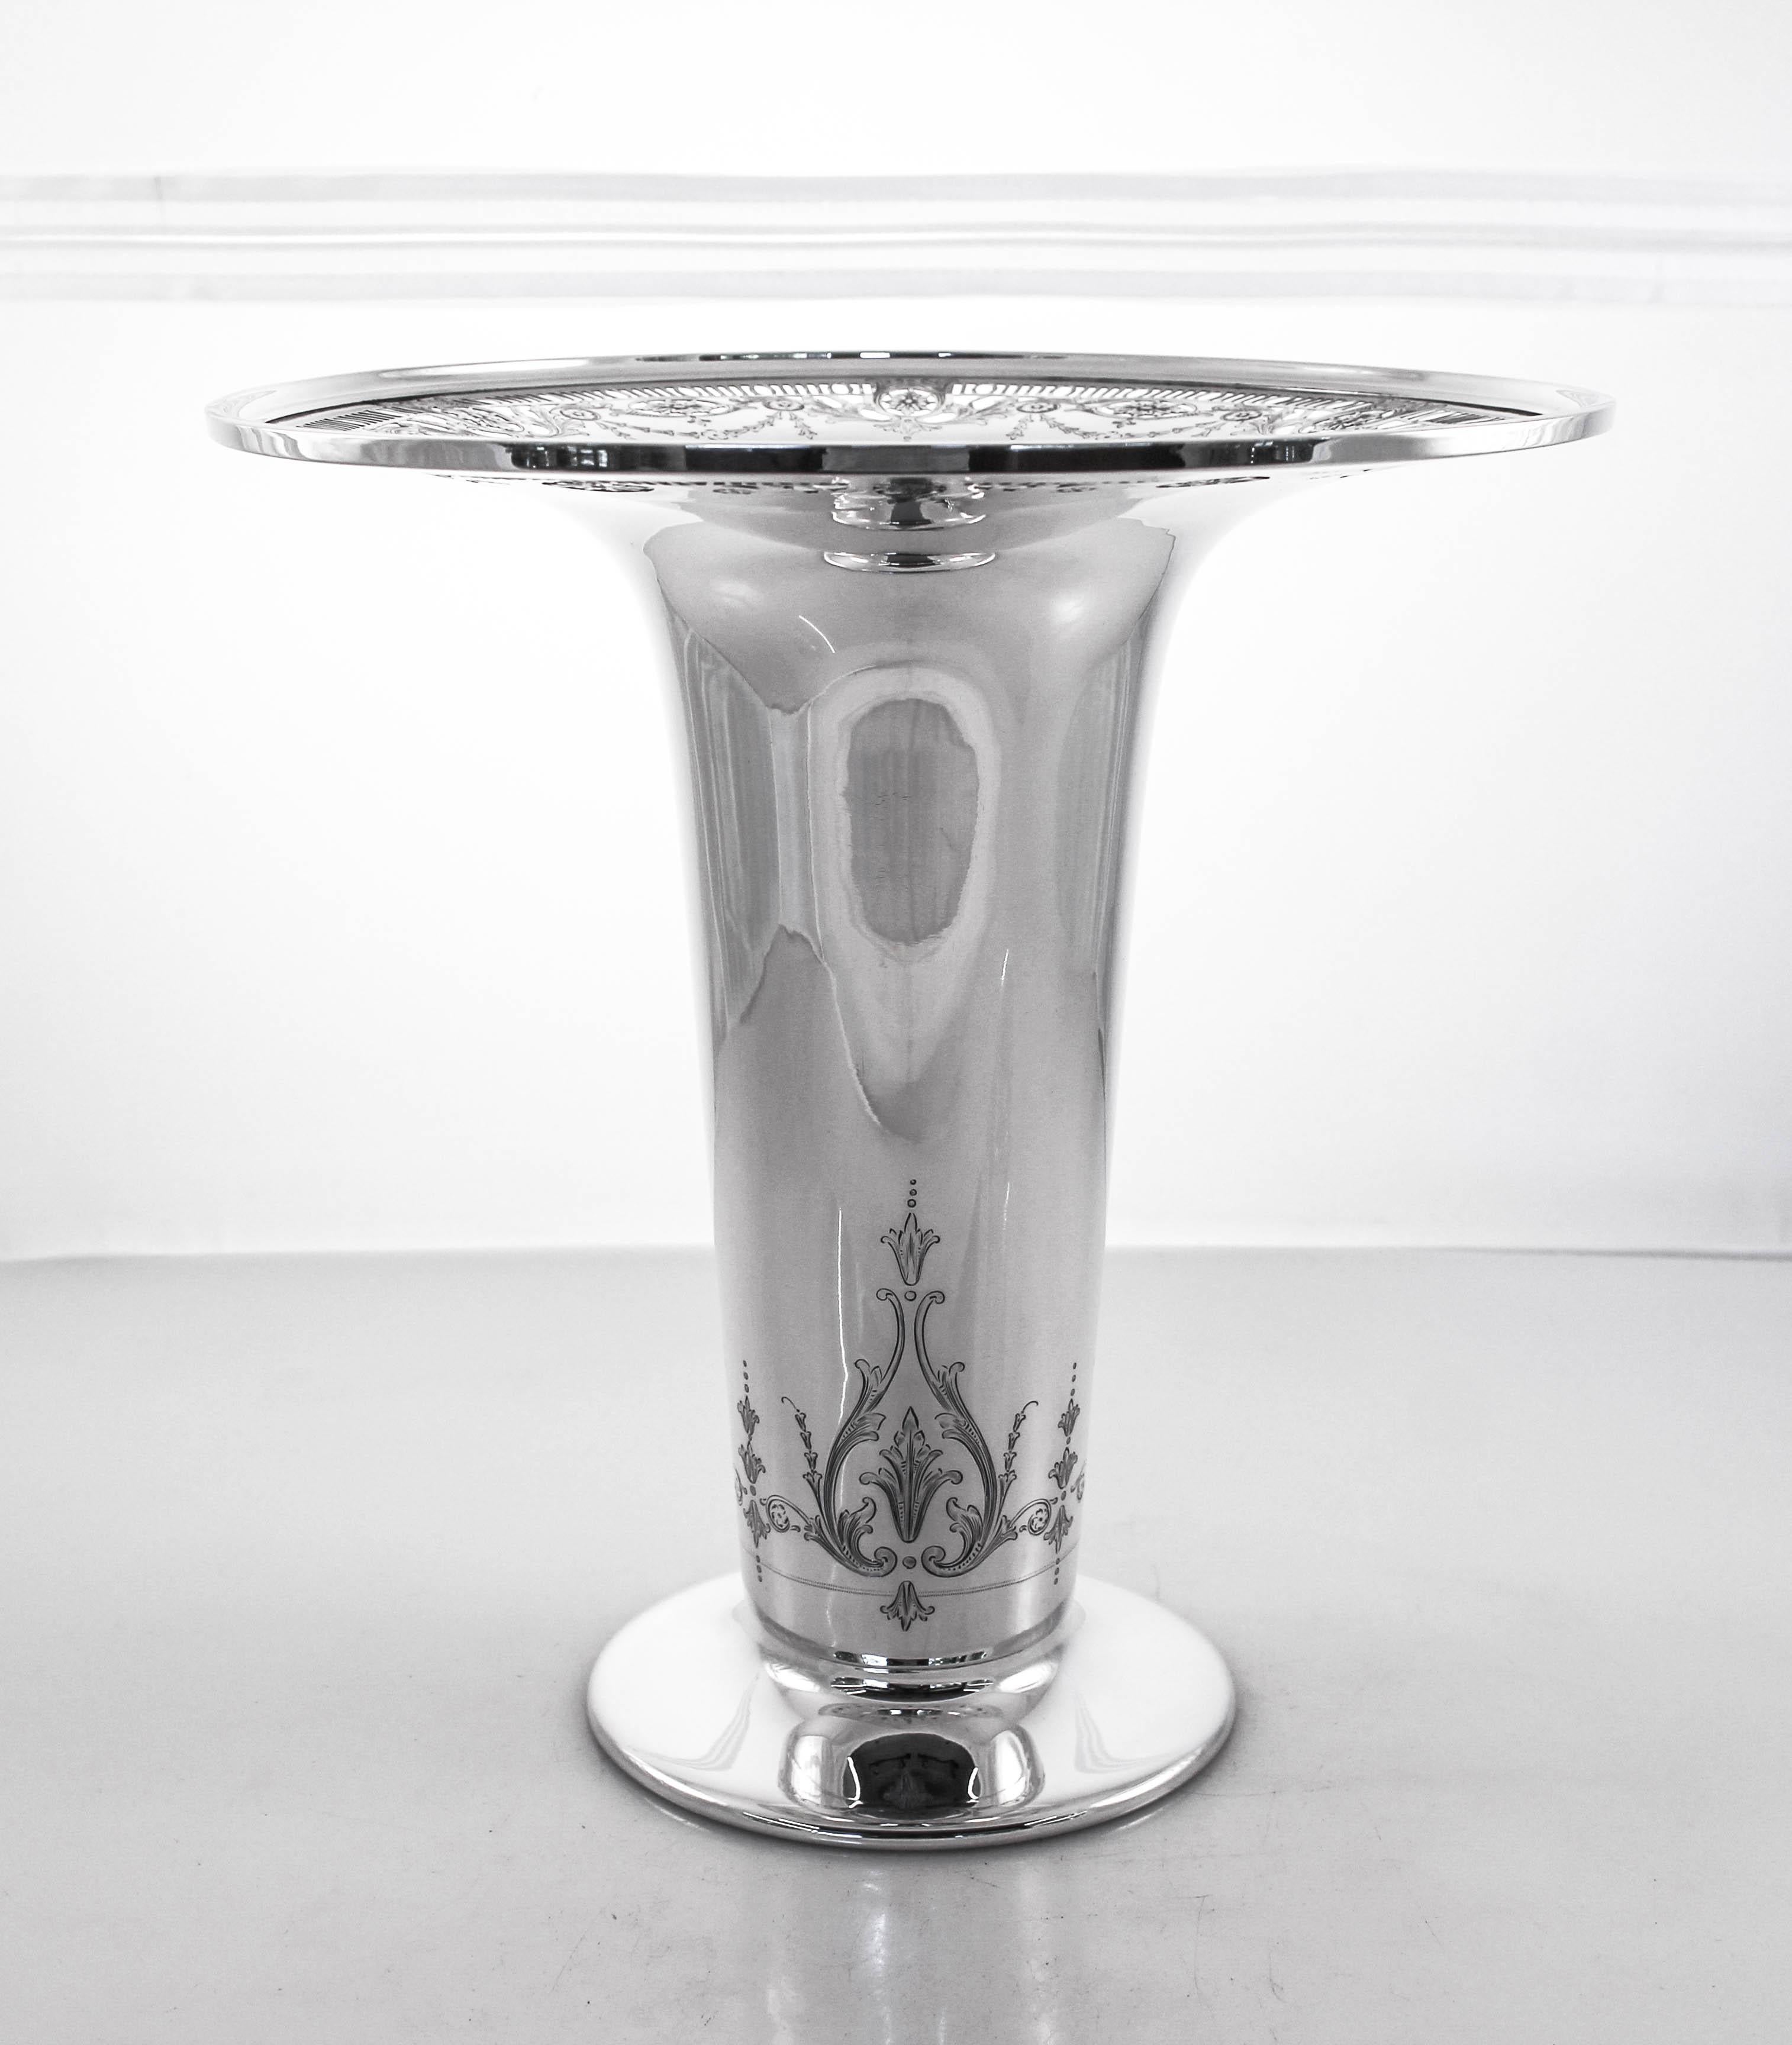 We proudly offer this sterling silver whiting vase from 1916. It has a large rim with a beautiful reticulated design and etched wreaths and bows interspersed. Along the bottom, just above the base, which is not weighted, there is a pristine etched